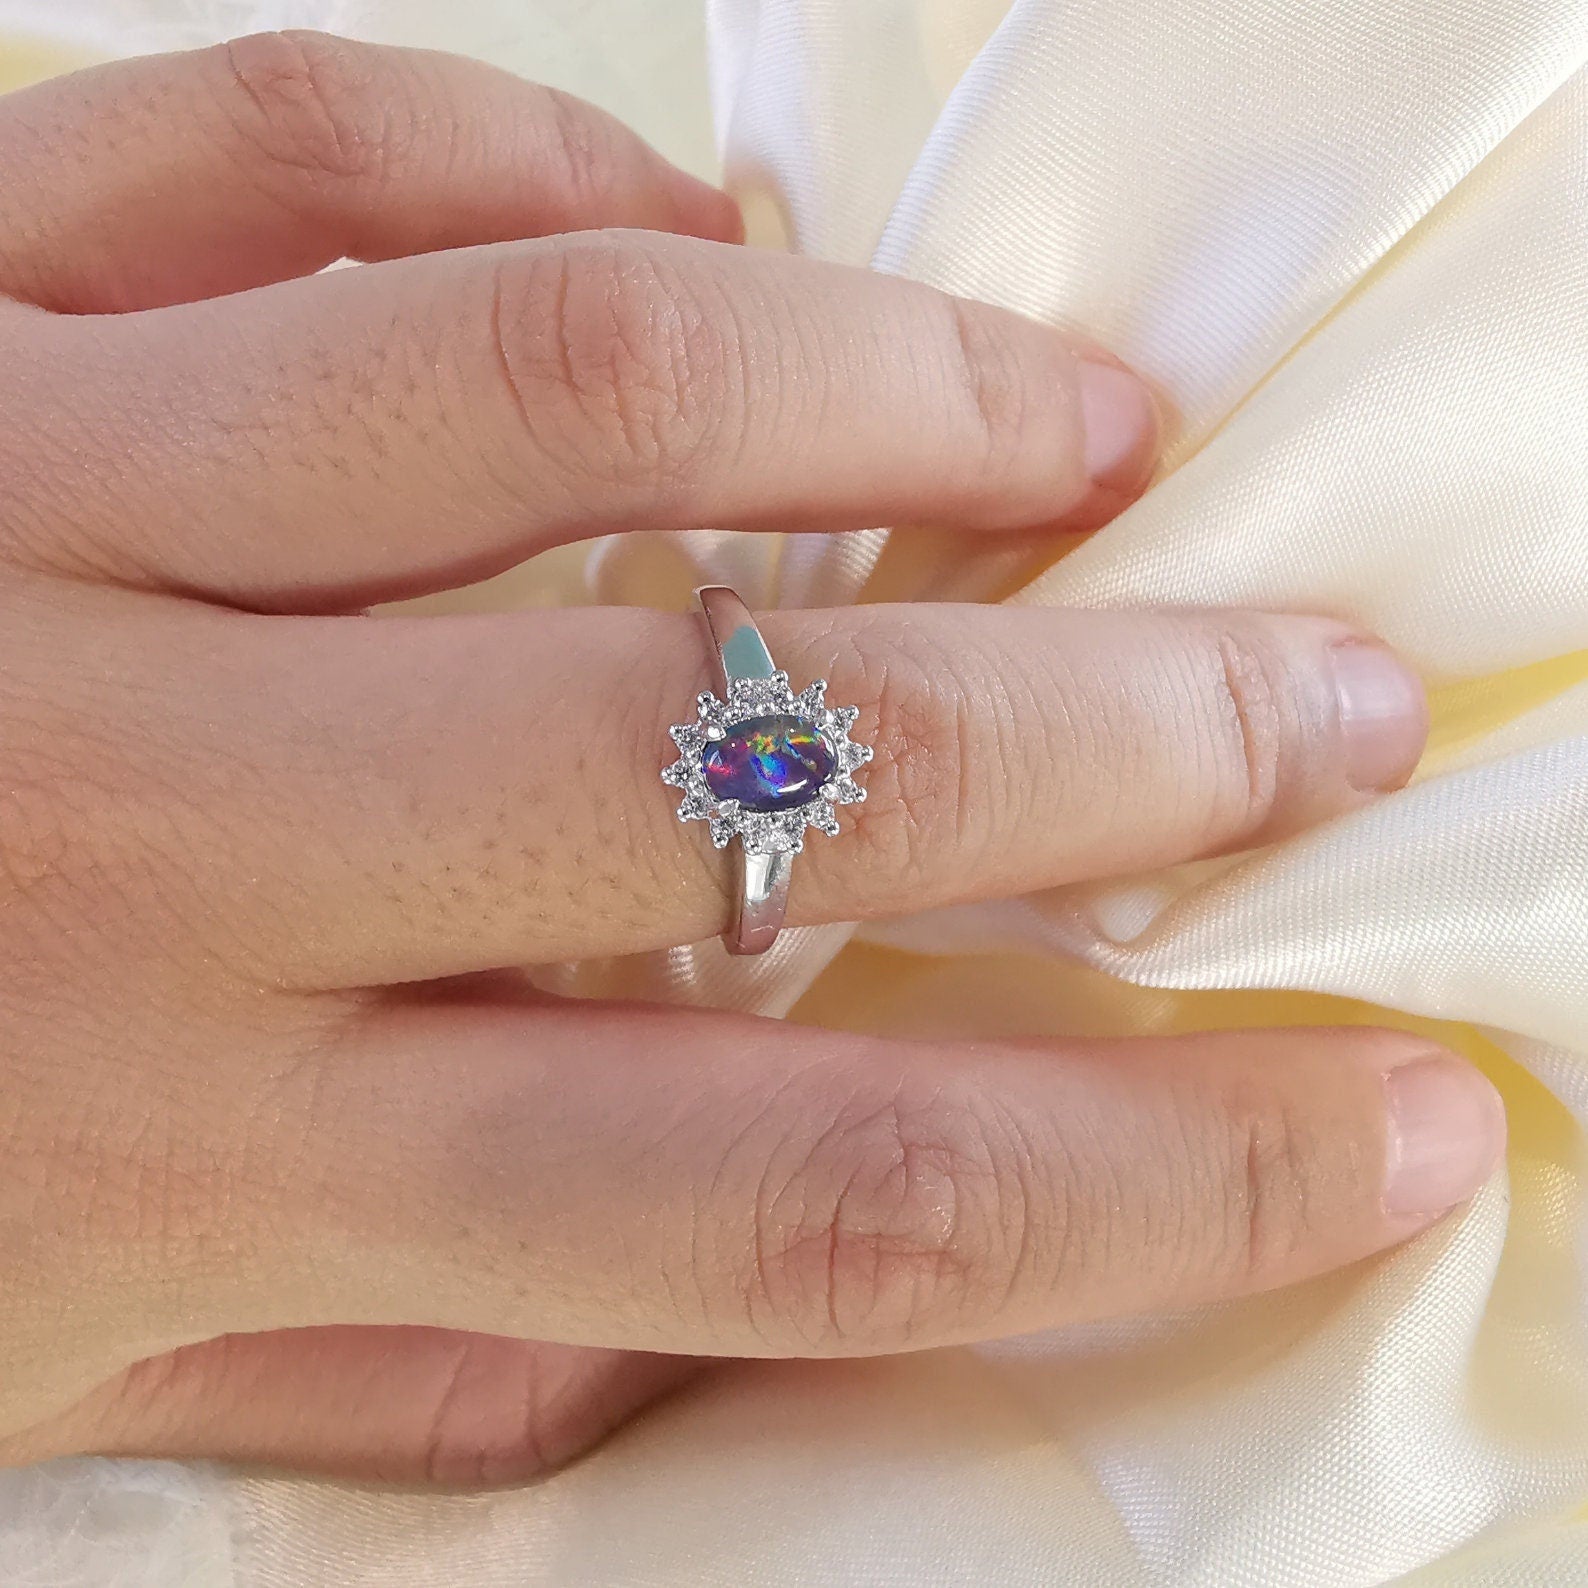 Elegant Triplet Opal Ring with Cubic Zirconias - Perfect Opal Gift-Vsabel Jewellery